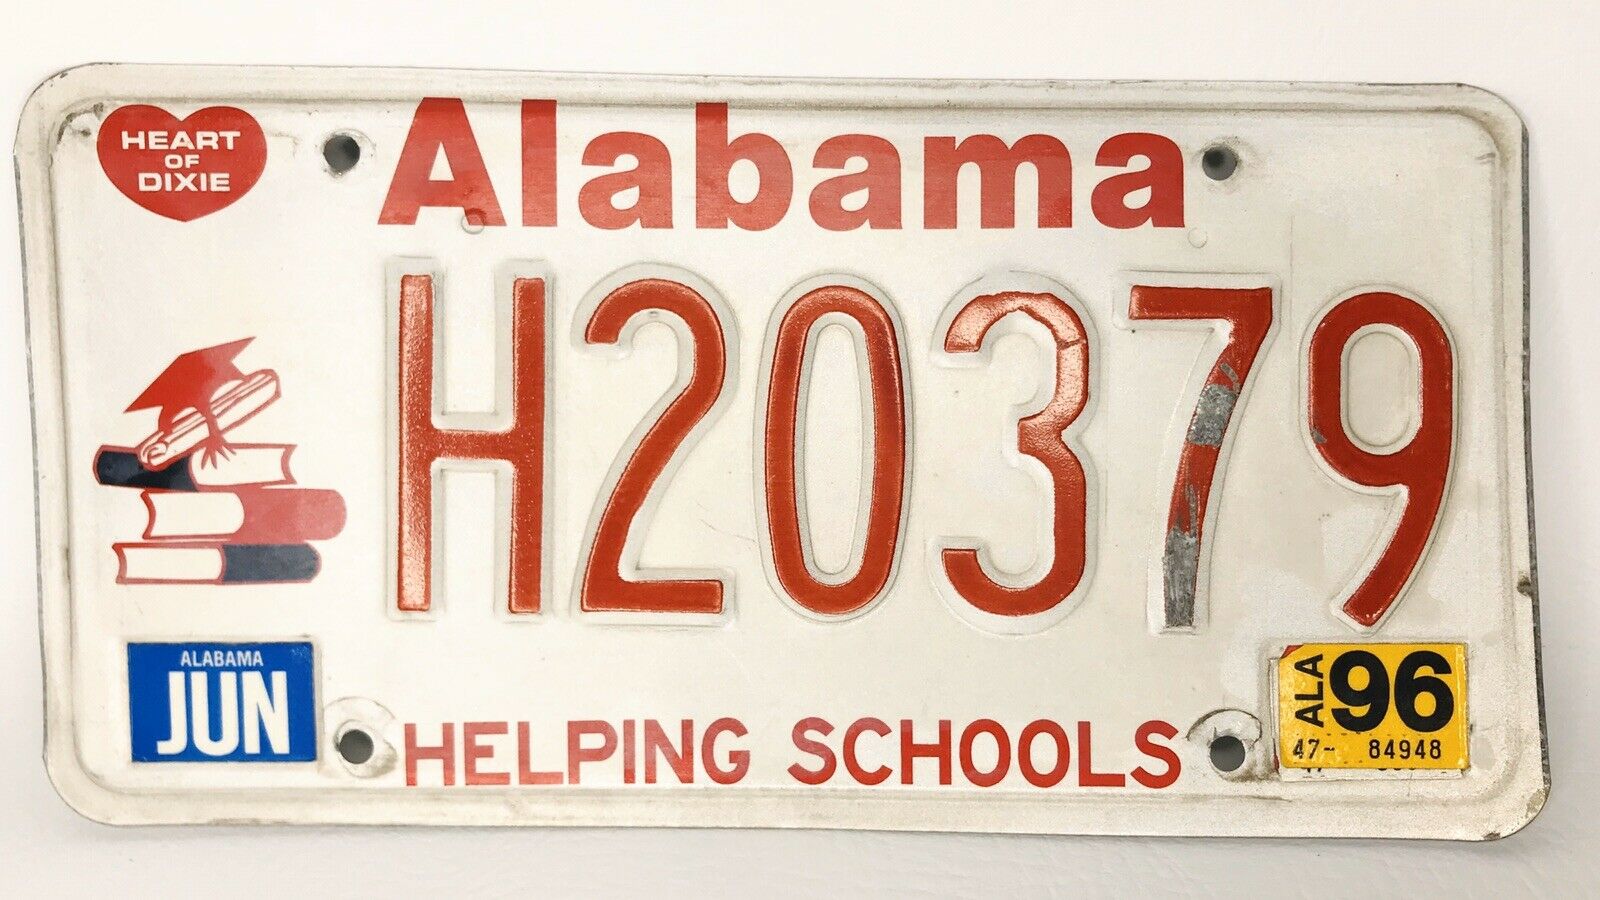 Alabama Helping Schools License Plate Heart Of Dixie Books Cap #h20379 1996 90s